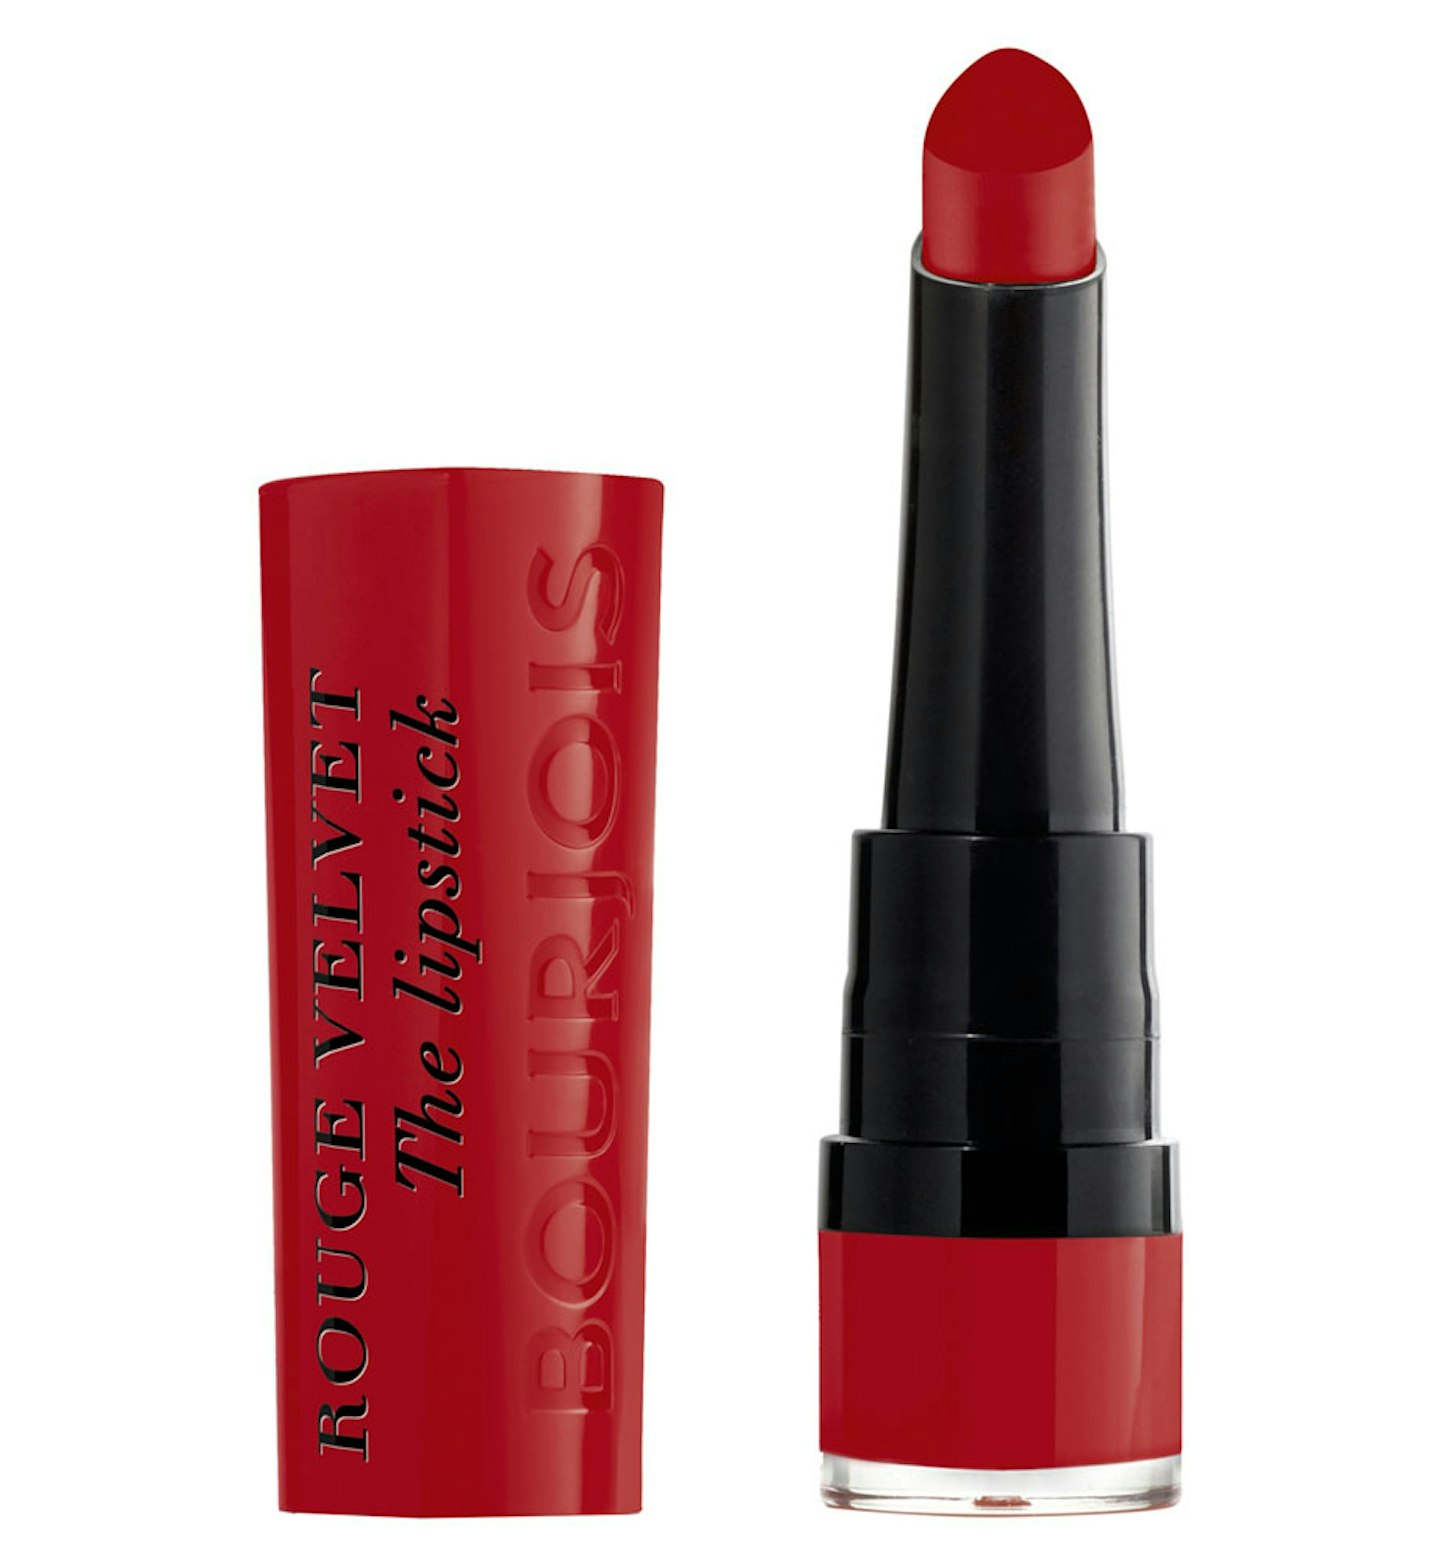 Bourjois Rouge Velvet The Lipstick in Rubis Cute, £8.99 from Boots